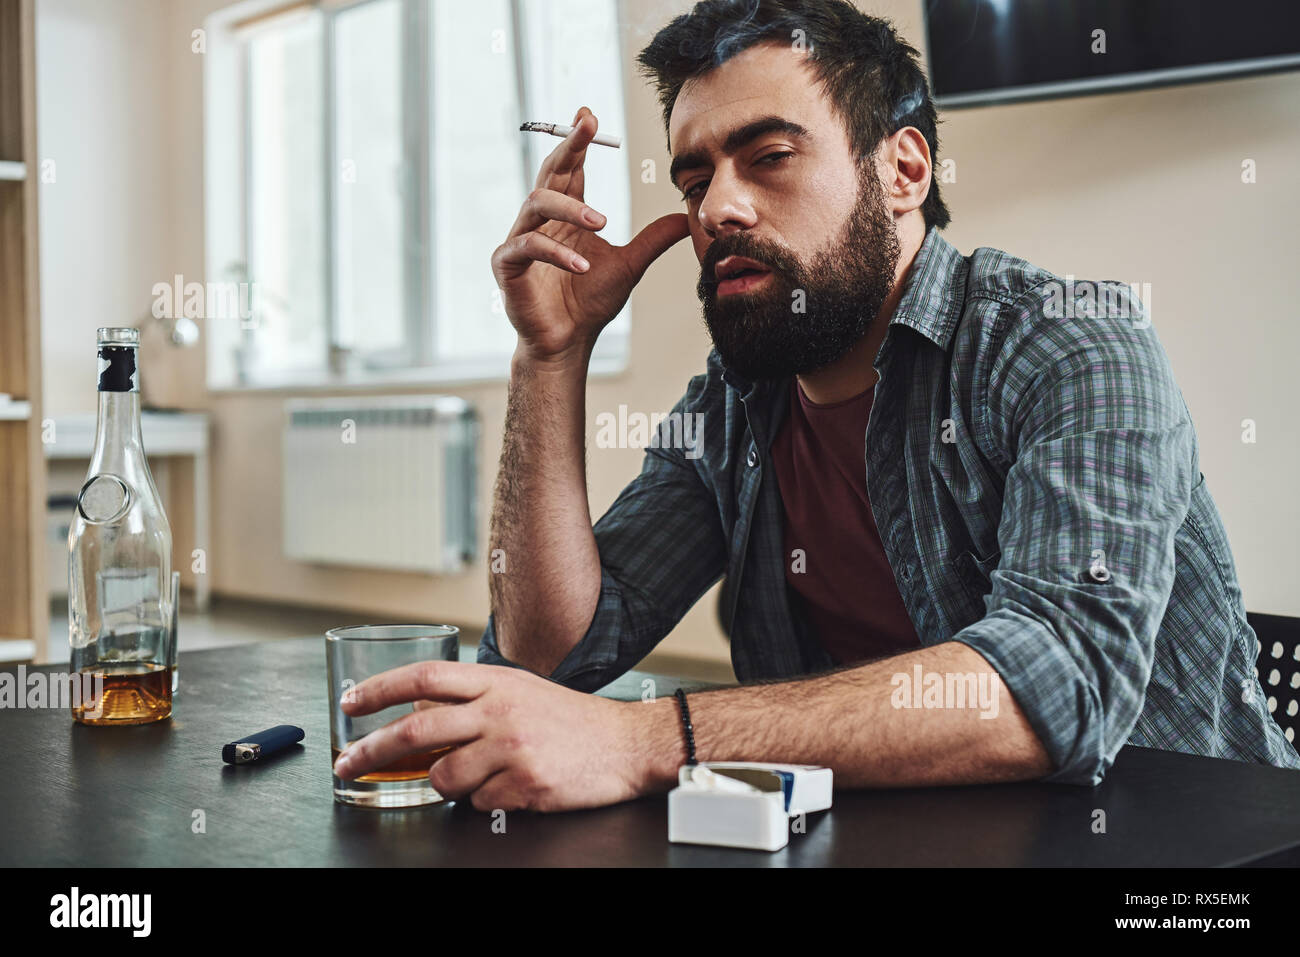 Portrait of dark-haired, sad and wasted alcoholic man sitting at the table, in the kitchen, smoking and drinking whiskey, holding glass and cigarette, Stock Photo